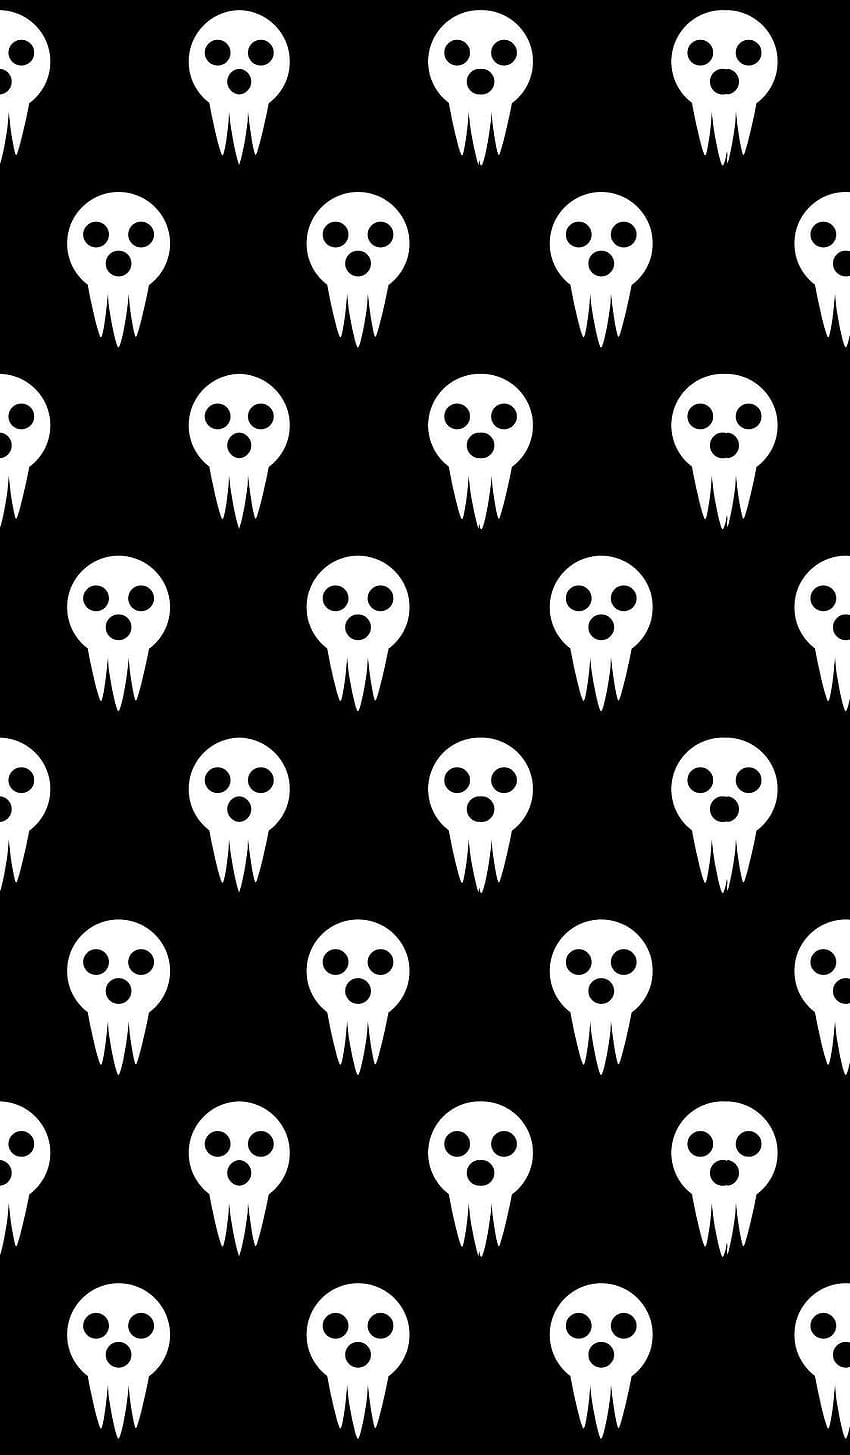 37 Soul Eater Wallpapers for iPhone and Android by Francisco Fernandez